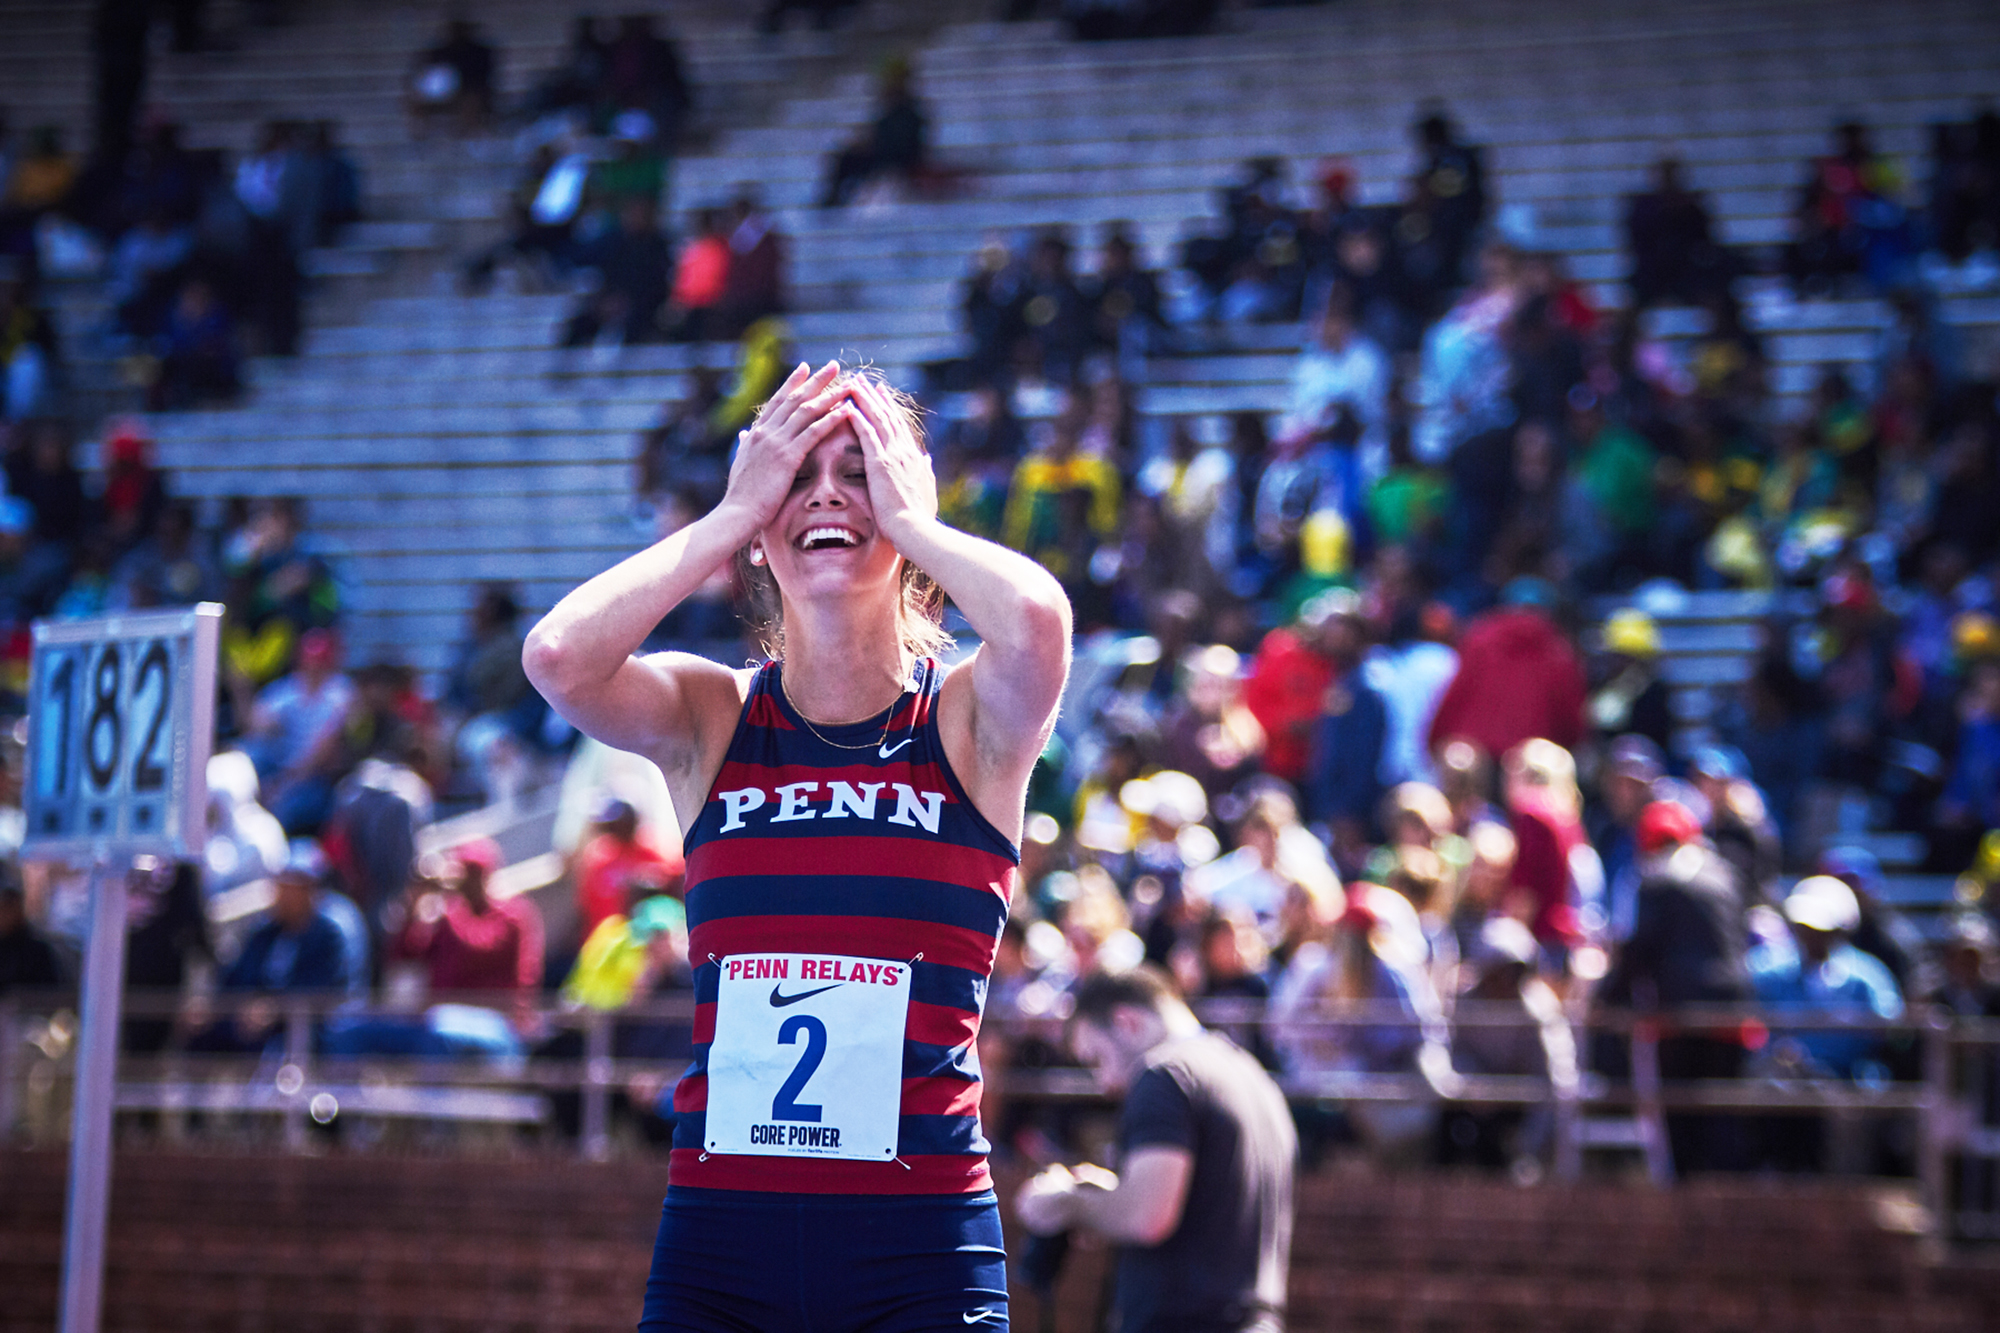 Anna Peyton Malizia looks pleased after competing in the high jump at the Penn Relays.